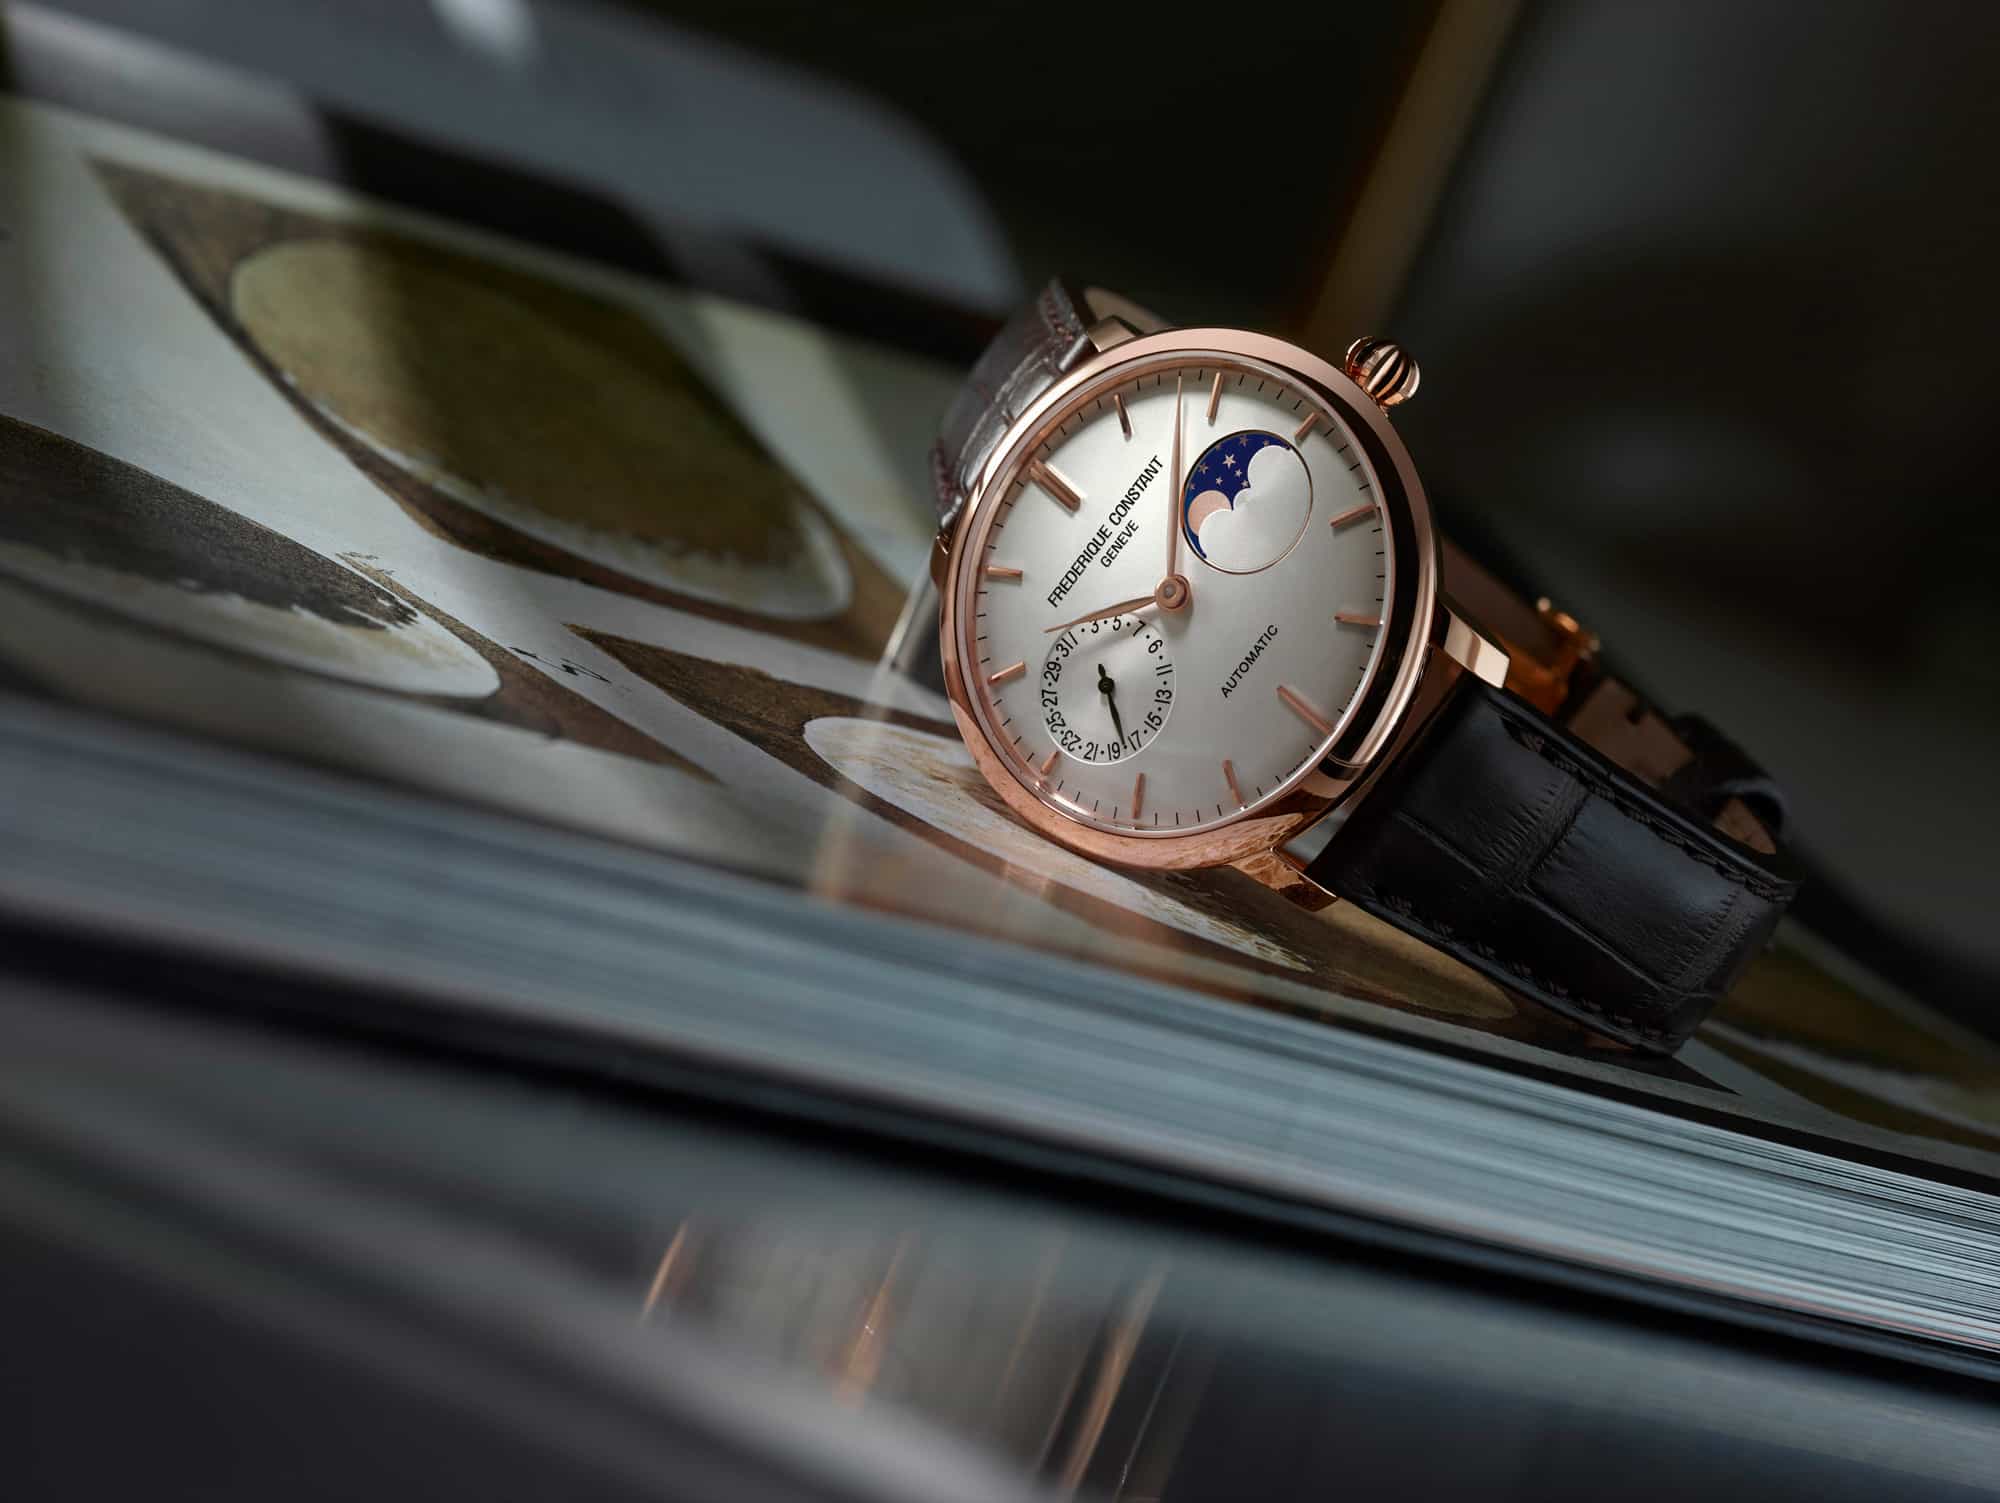 Introducing the Frederique Constant Slimline Moonphase Manufacture